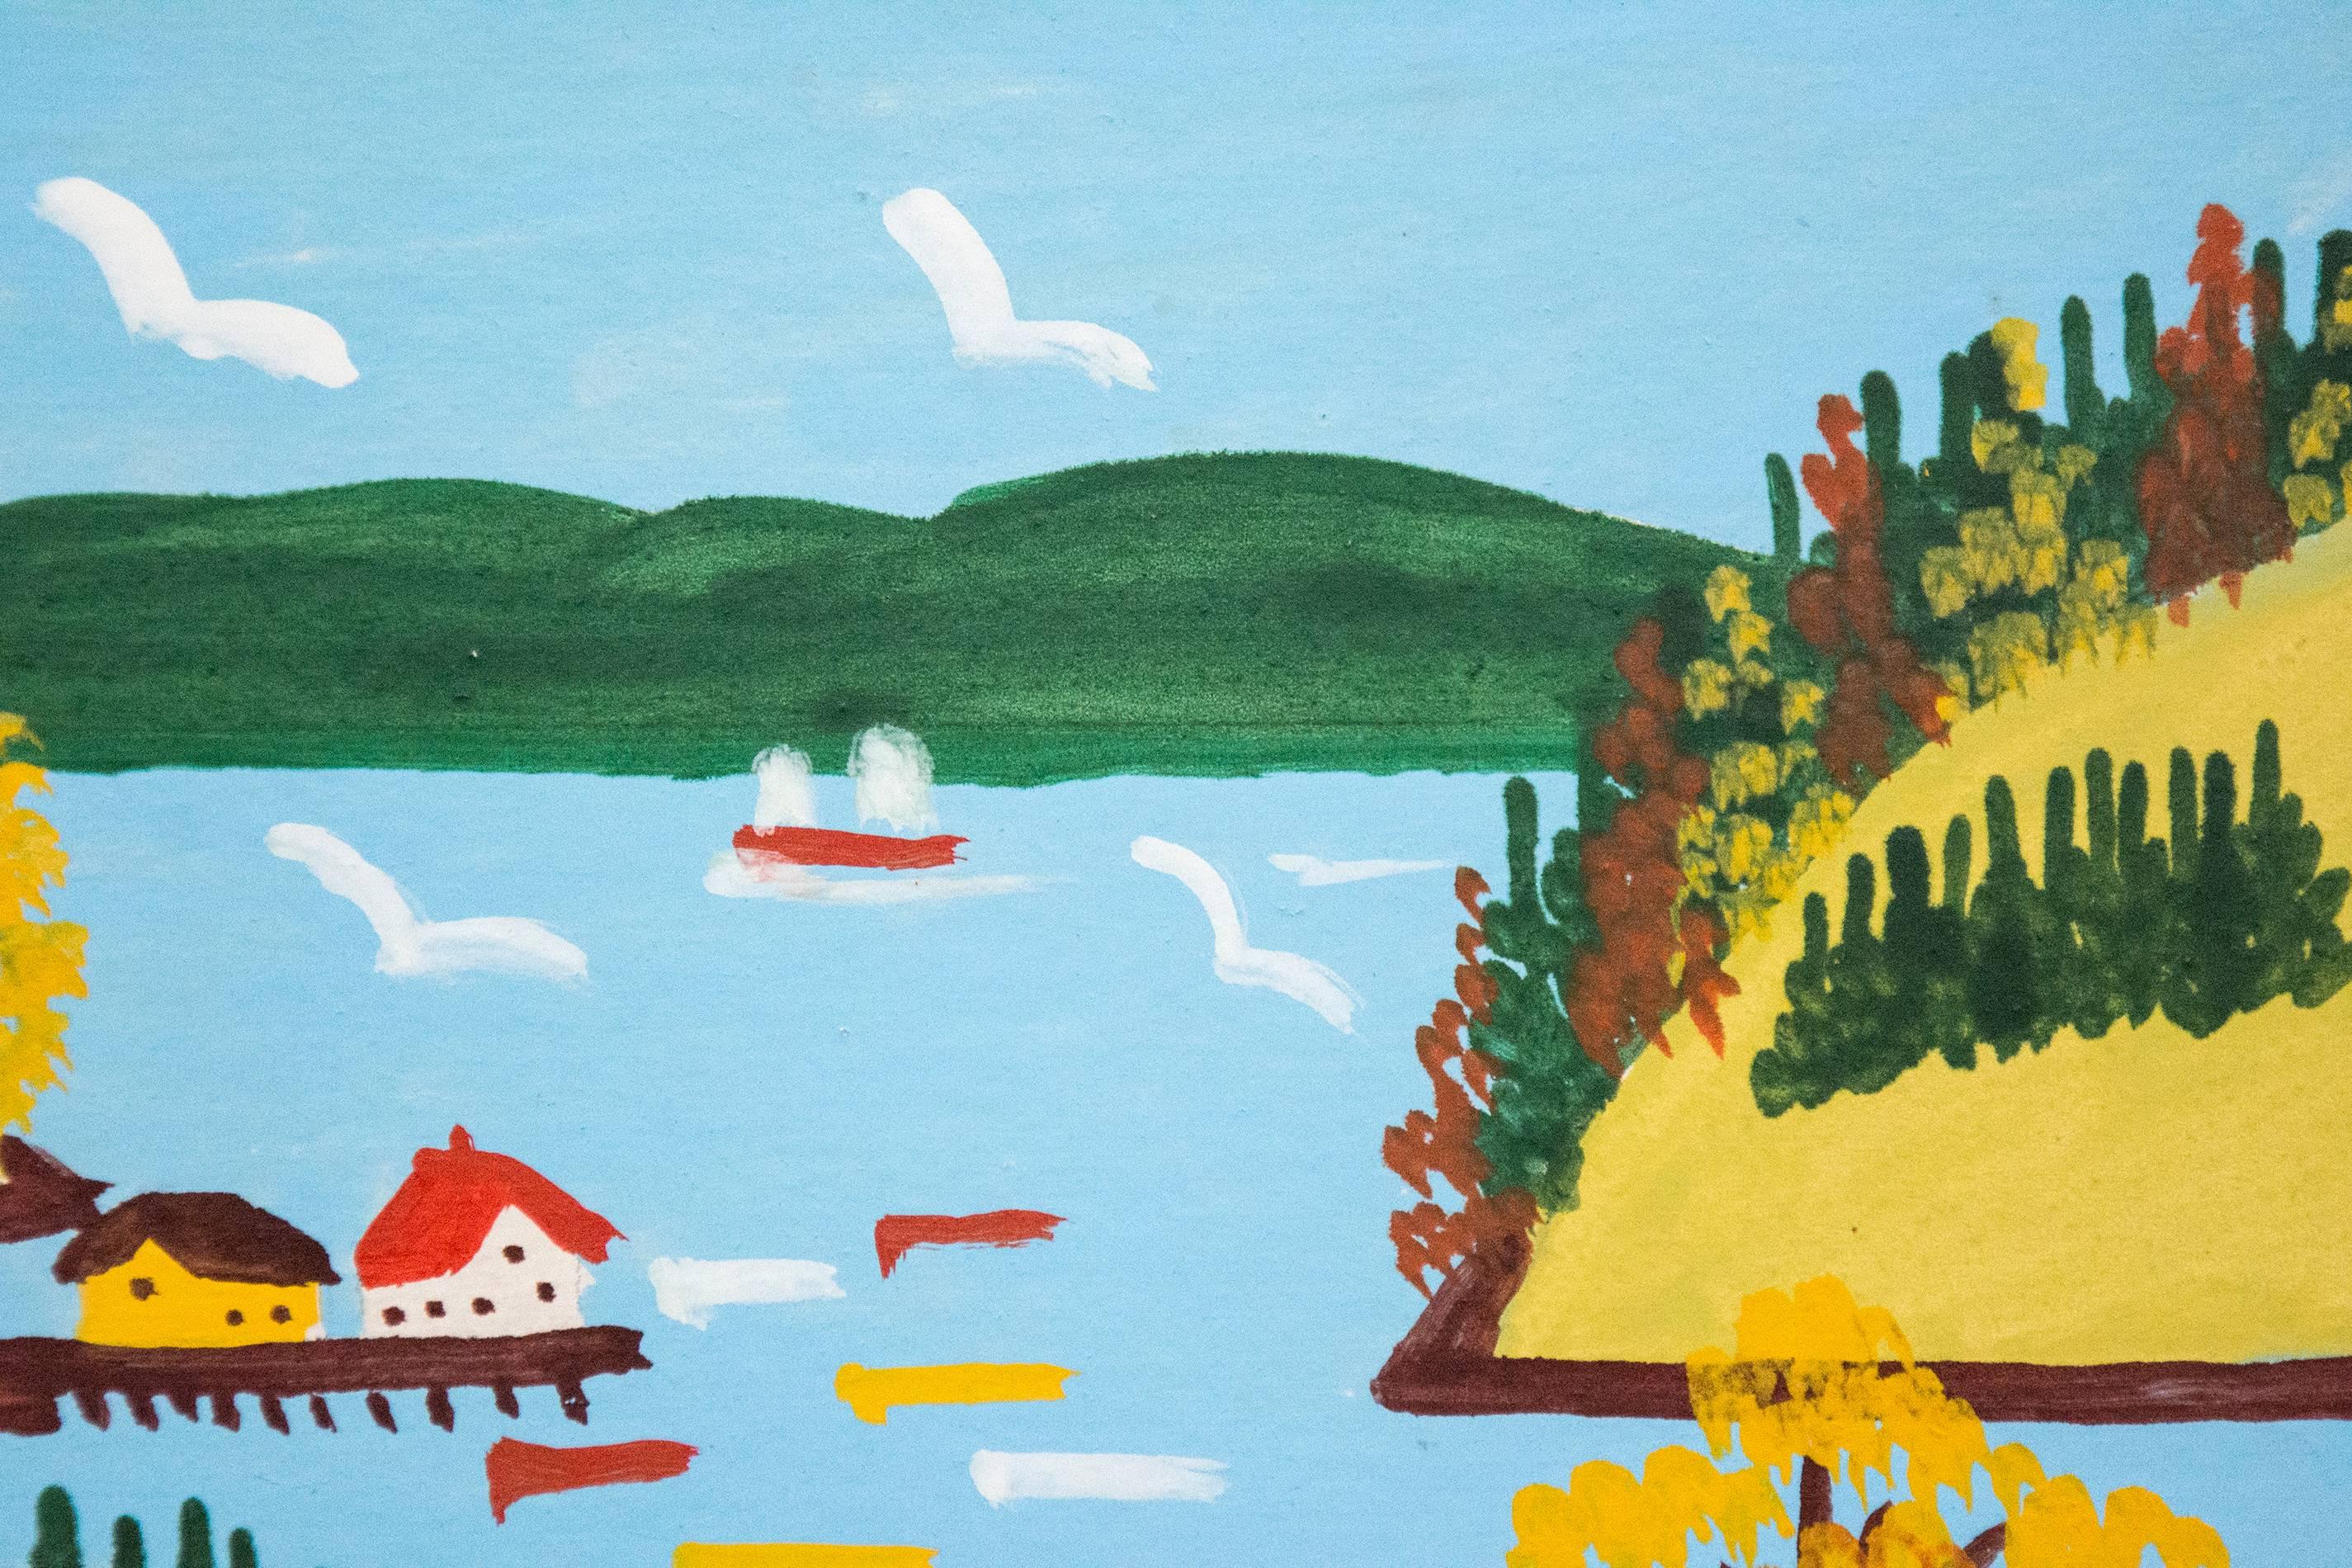 In this delightful painting, folk artist Maud Lewis depicts the coastal village of Sandy Cove on Digby Neck. Digby Neck is a peninsula extending into the Bay of Fundy off the north west coast of Nova Scotia. The town of Digby, where Lewis lived with